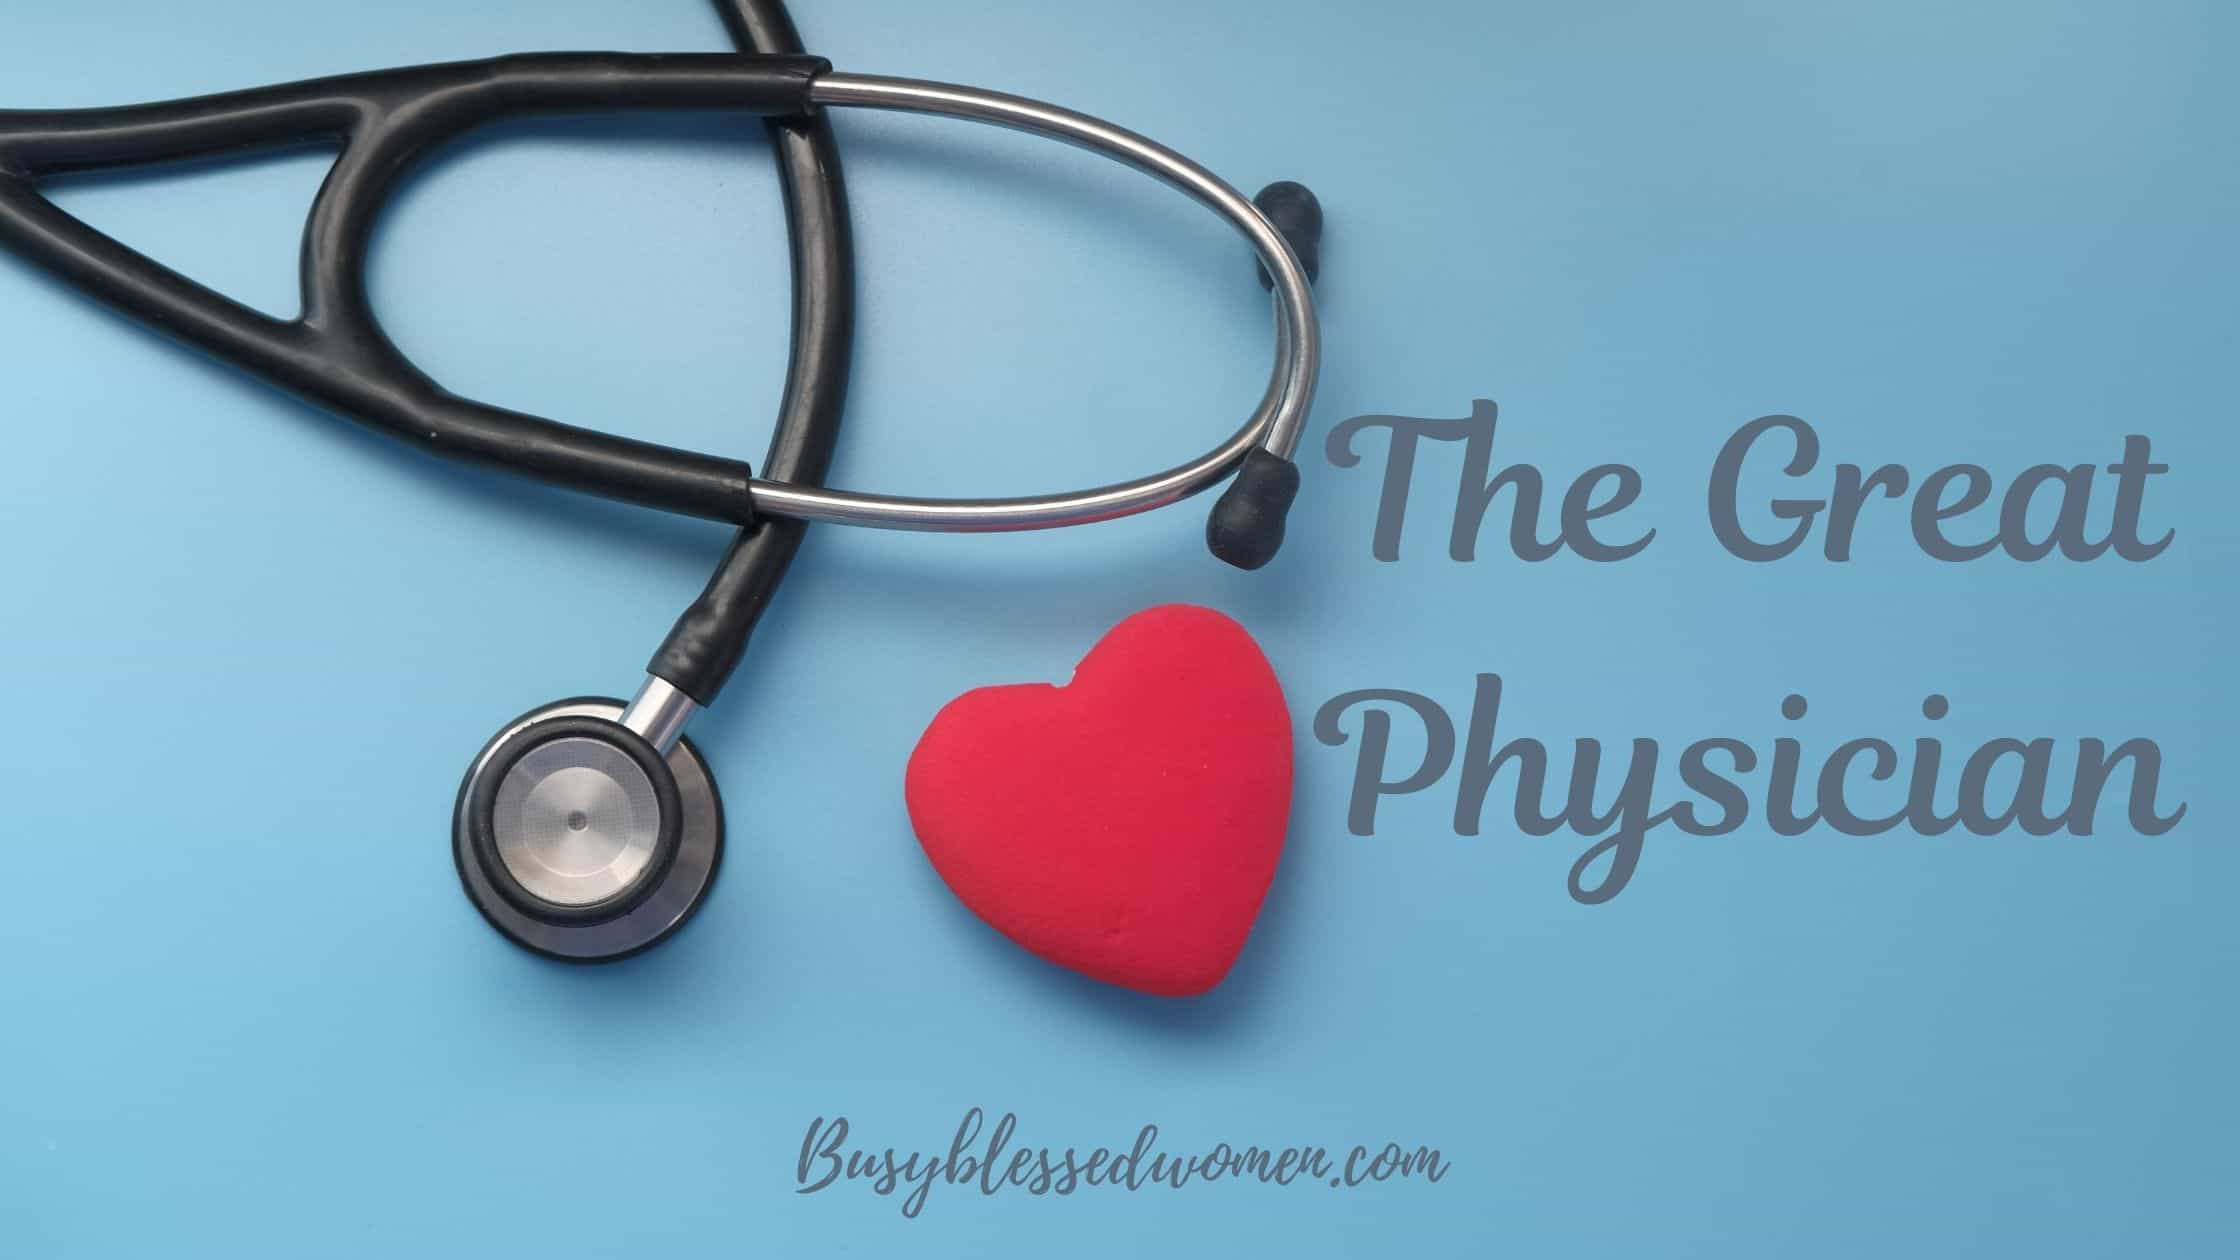 The Great Physician- black stethoscope on light blue background with small red heart